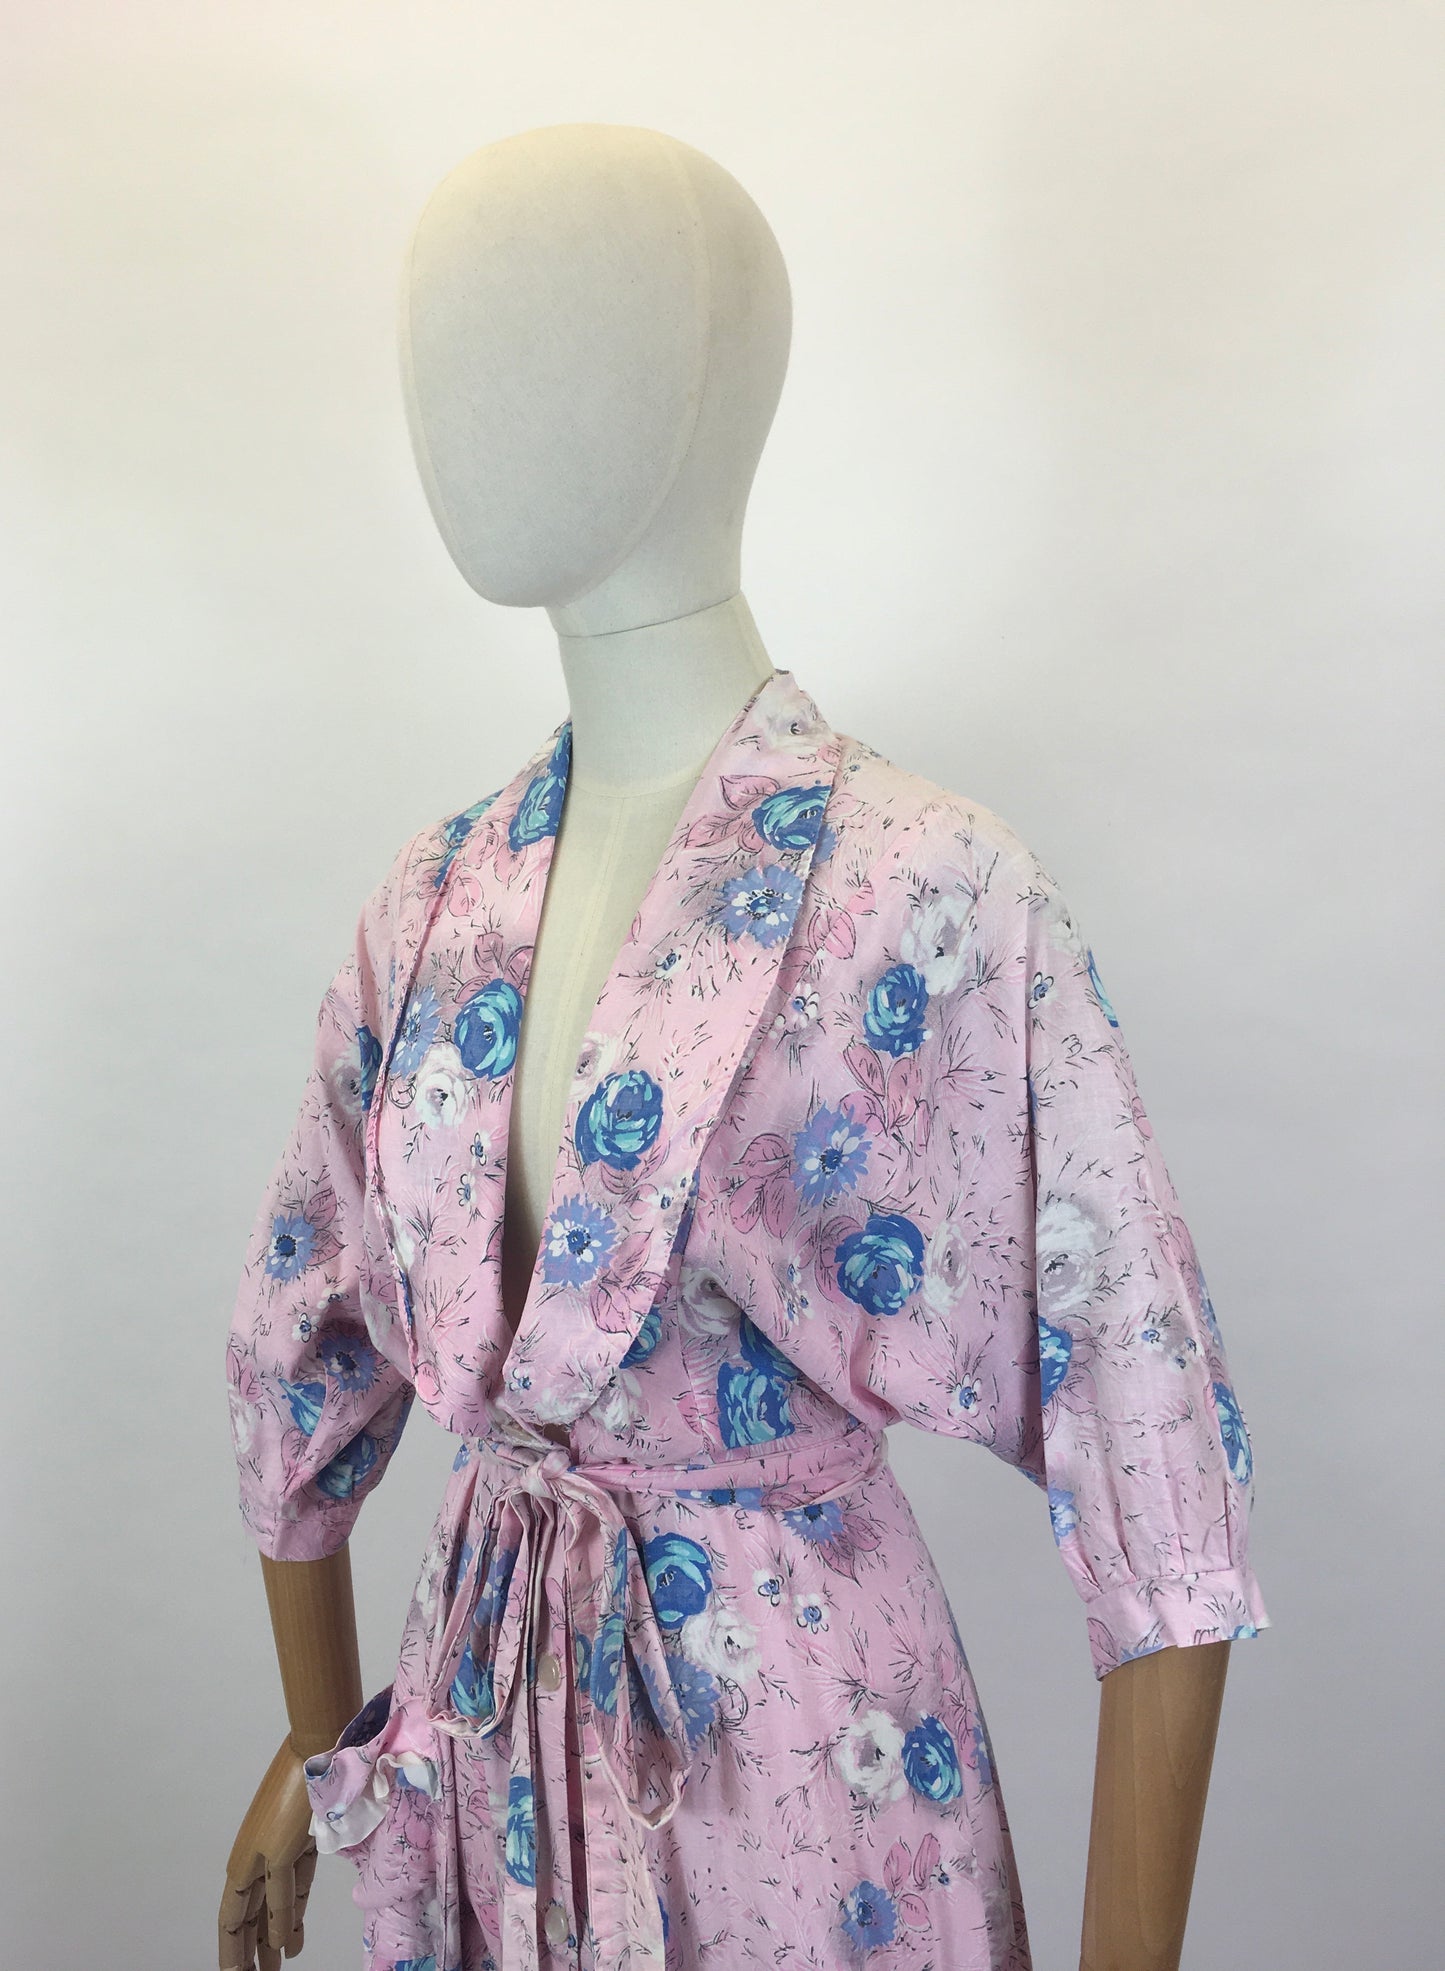 Original 1950’s Floral Cotton Dressing Gown - As is Condition